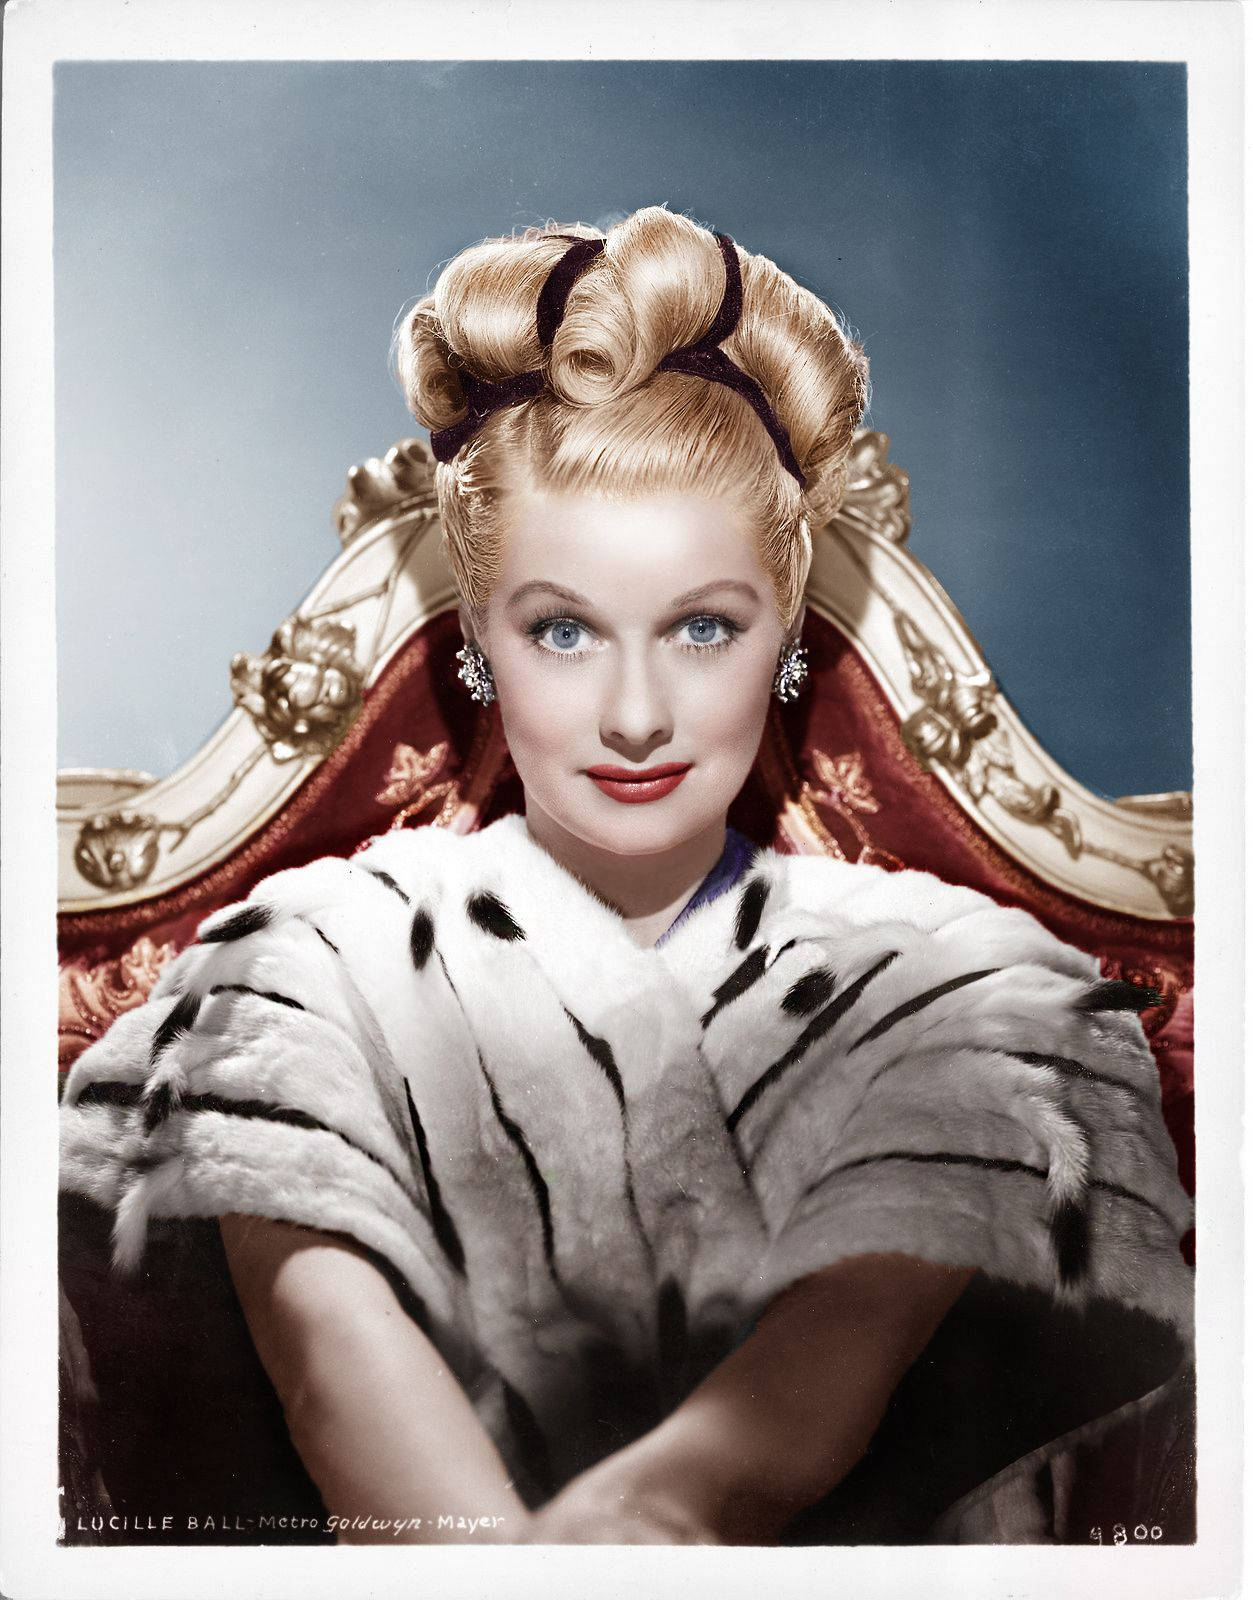 Caption: Lucille Ball Elegantly Sitting On A Red Chair